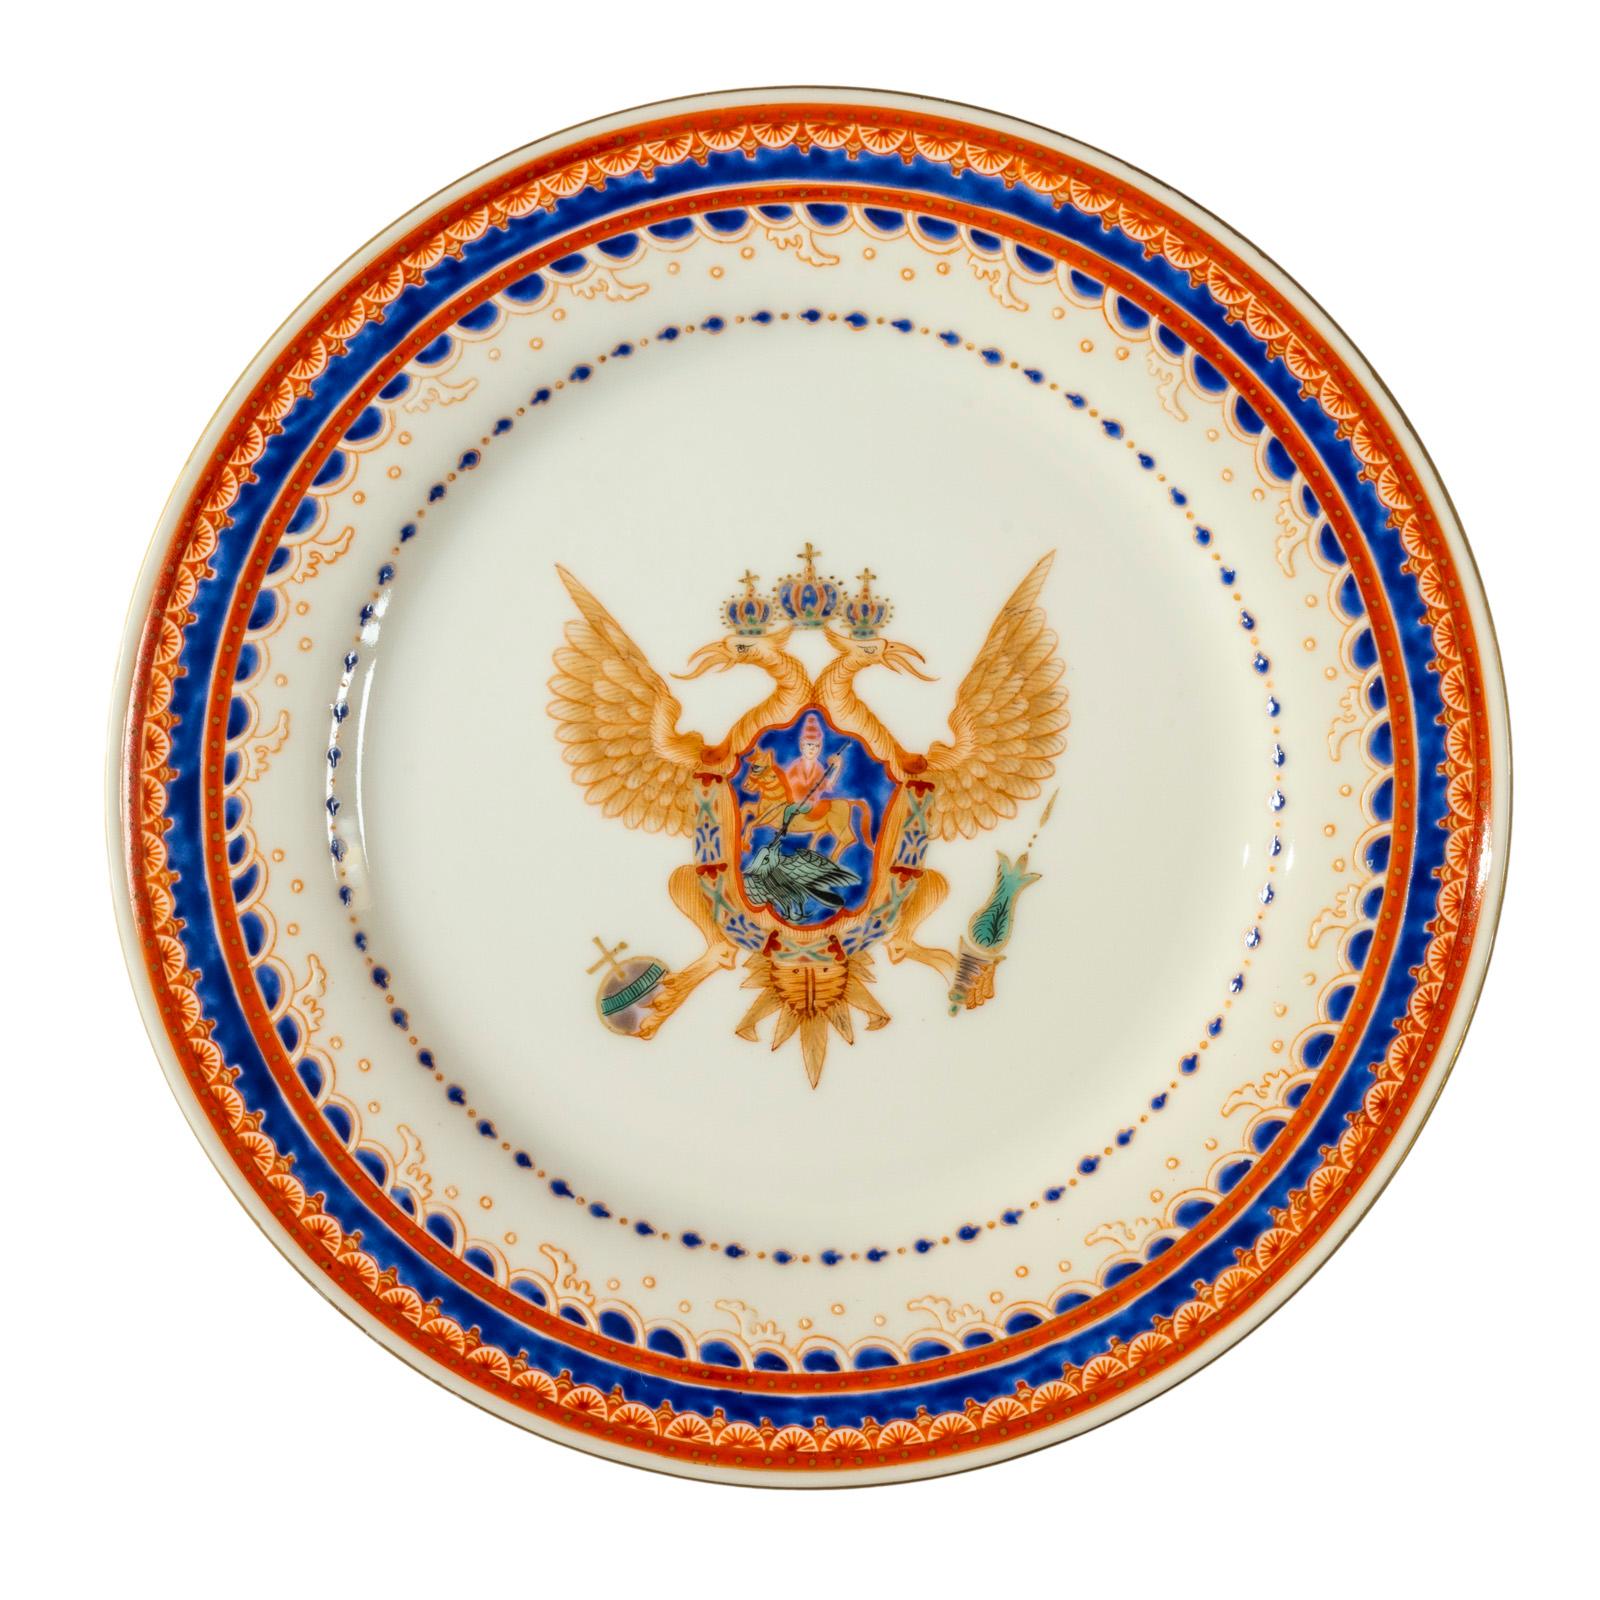 Colorful and festive dessert plates each decorated with an imperial Russian double headed eagle in the center, enclosing a deep blue shield of St. George Slaying the Dragon, the symbol of Moscow, Russia's ancient capital. The outer border features